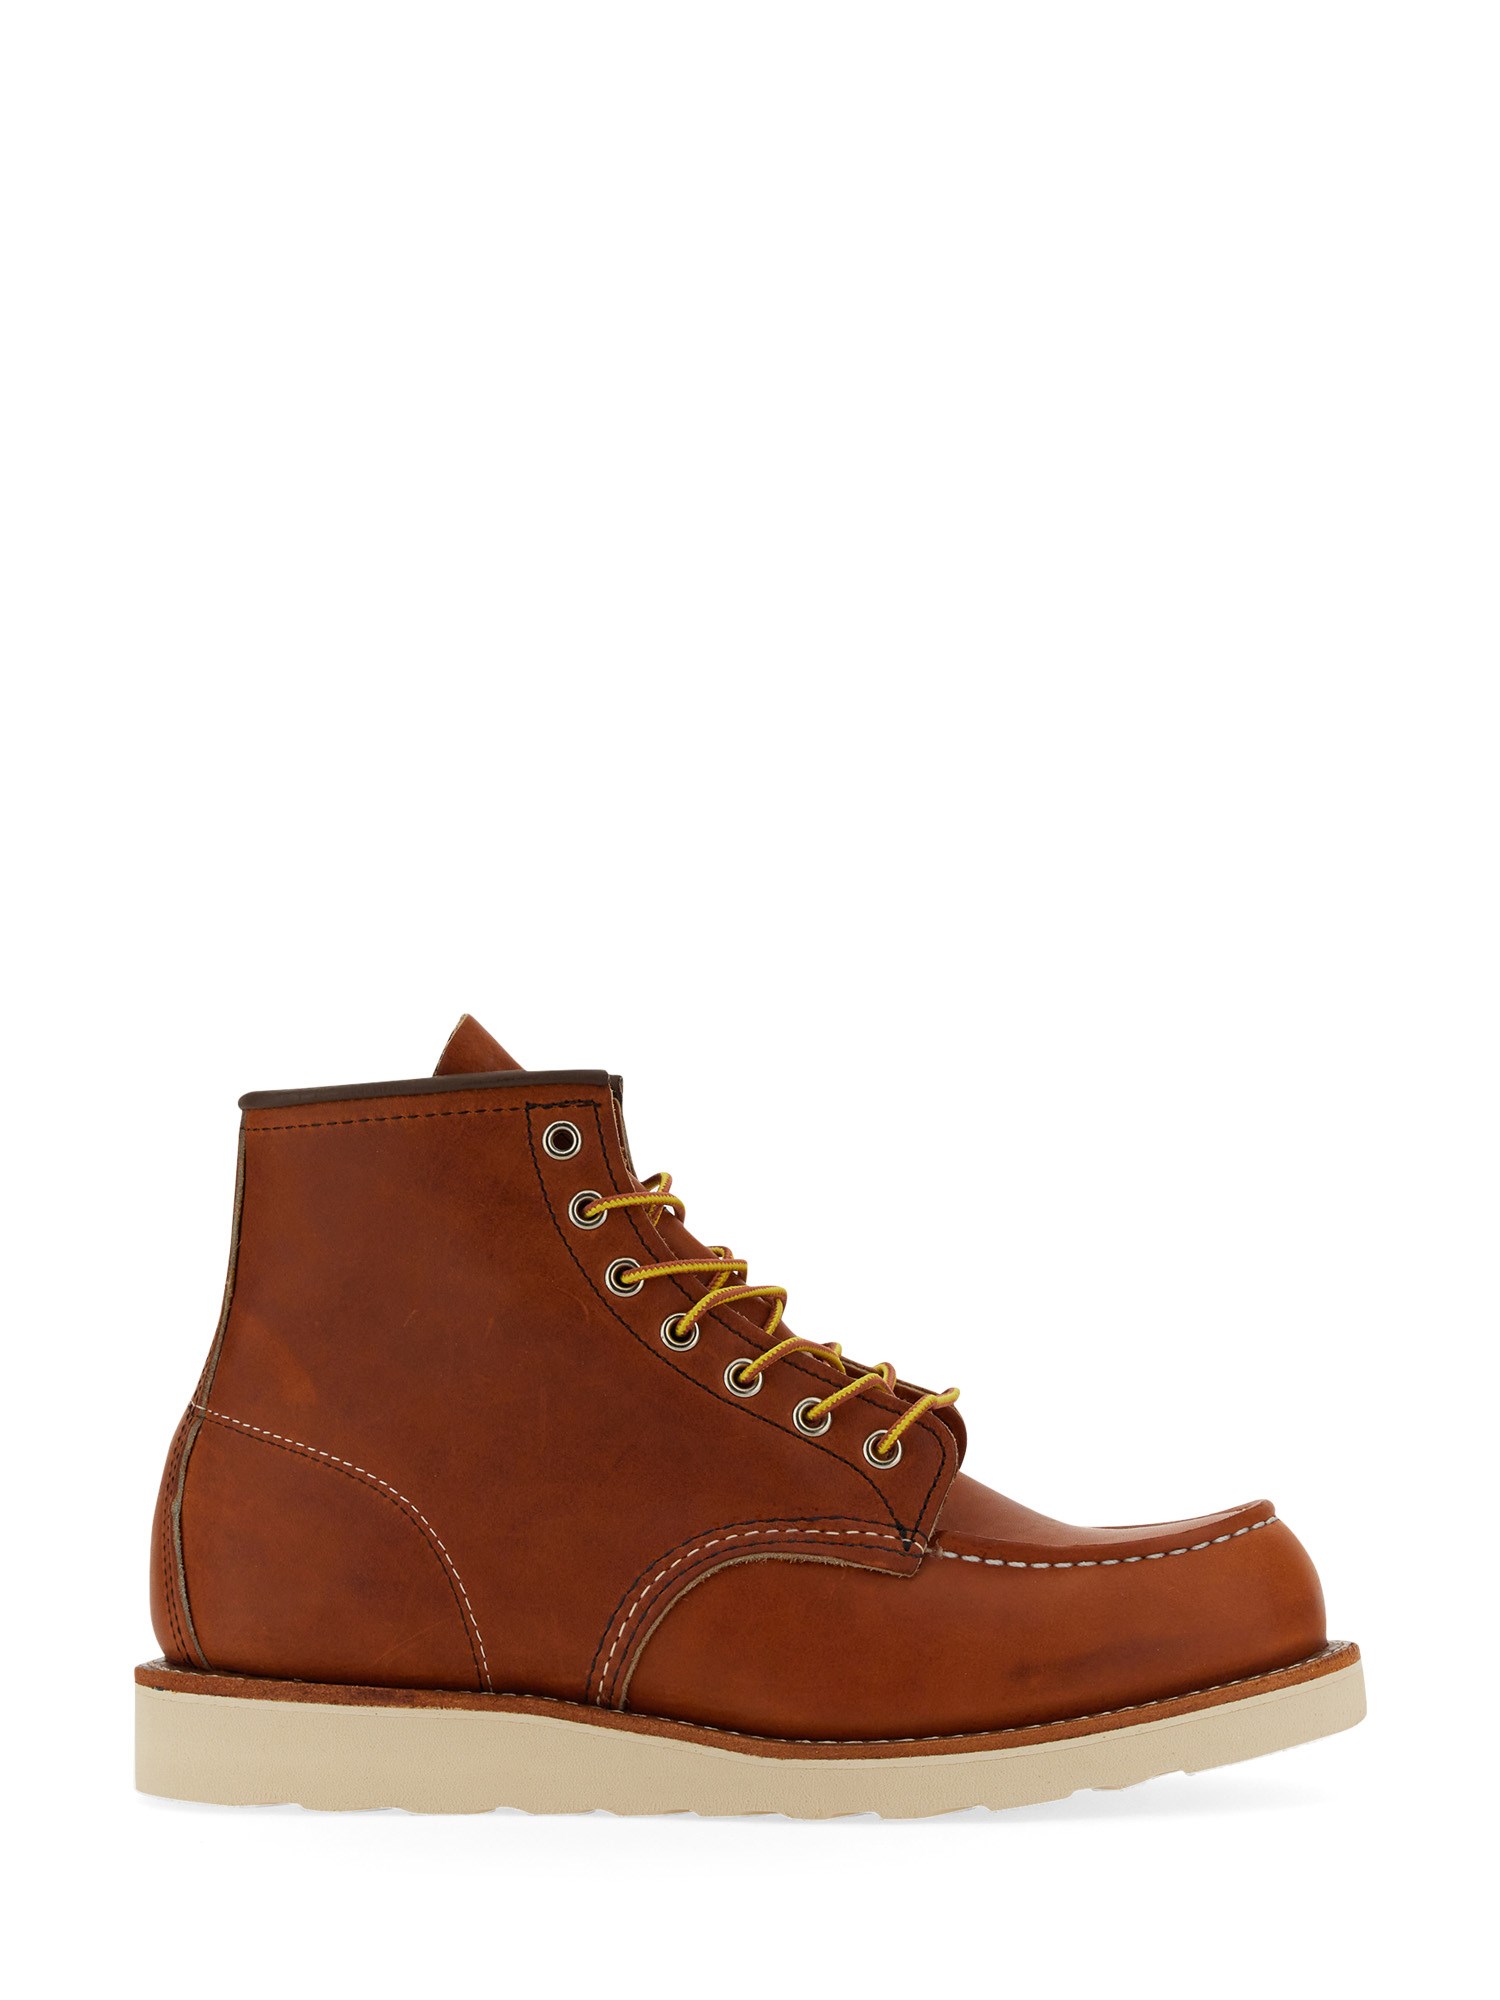 red wing red wing moc toe boot